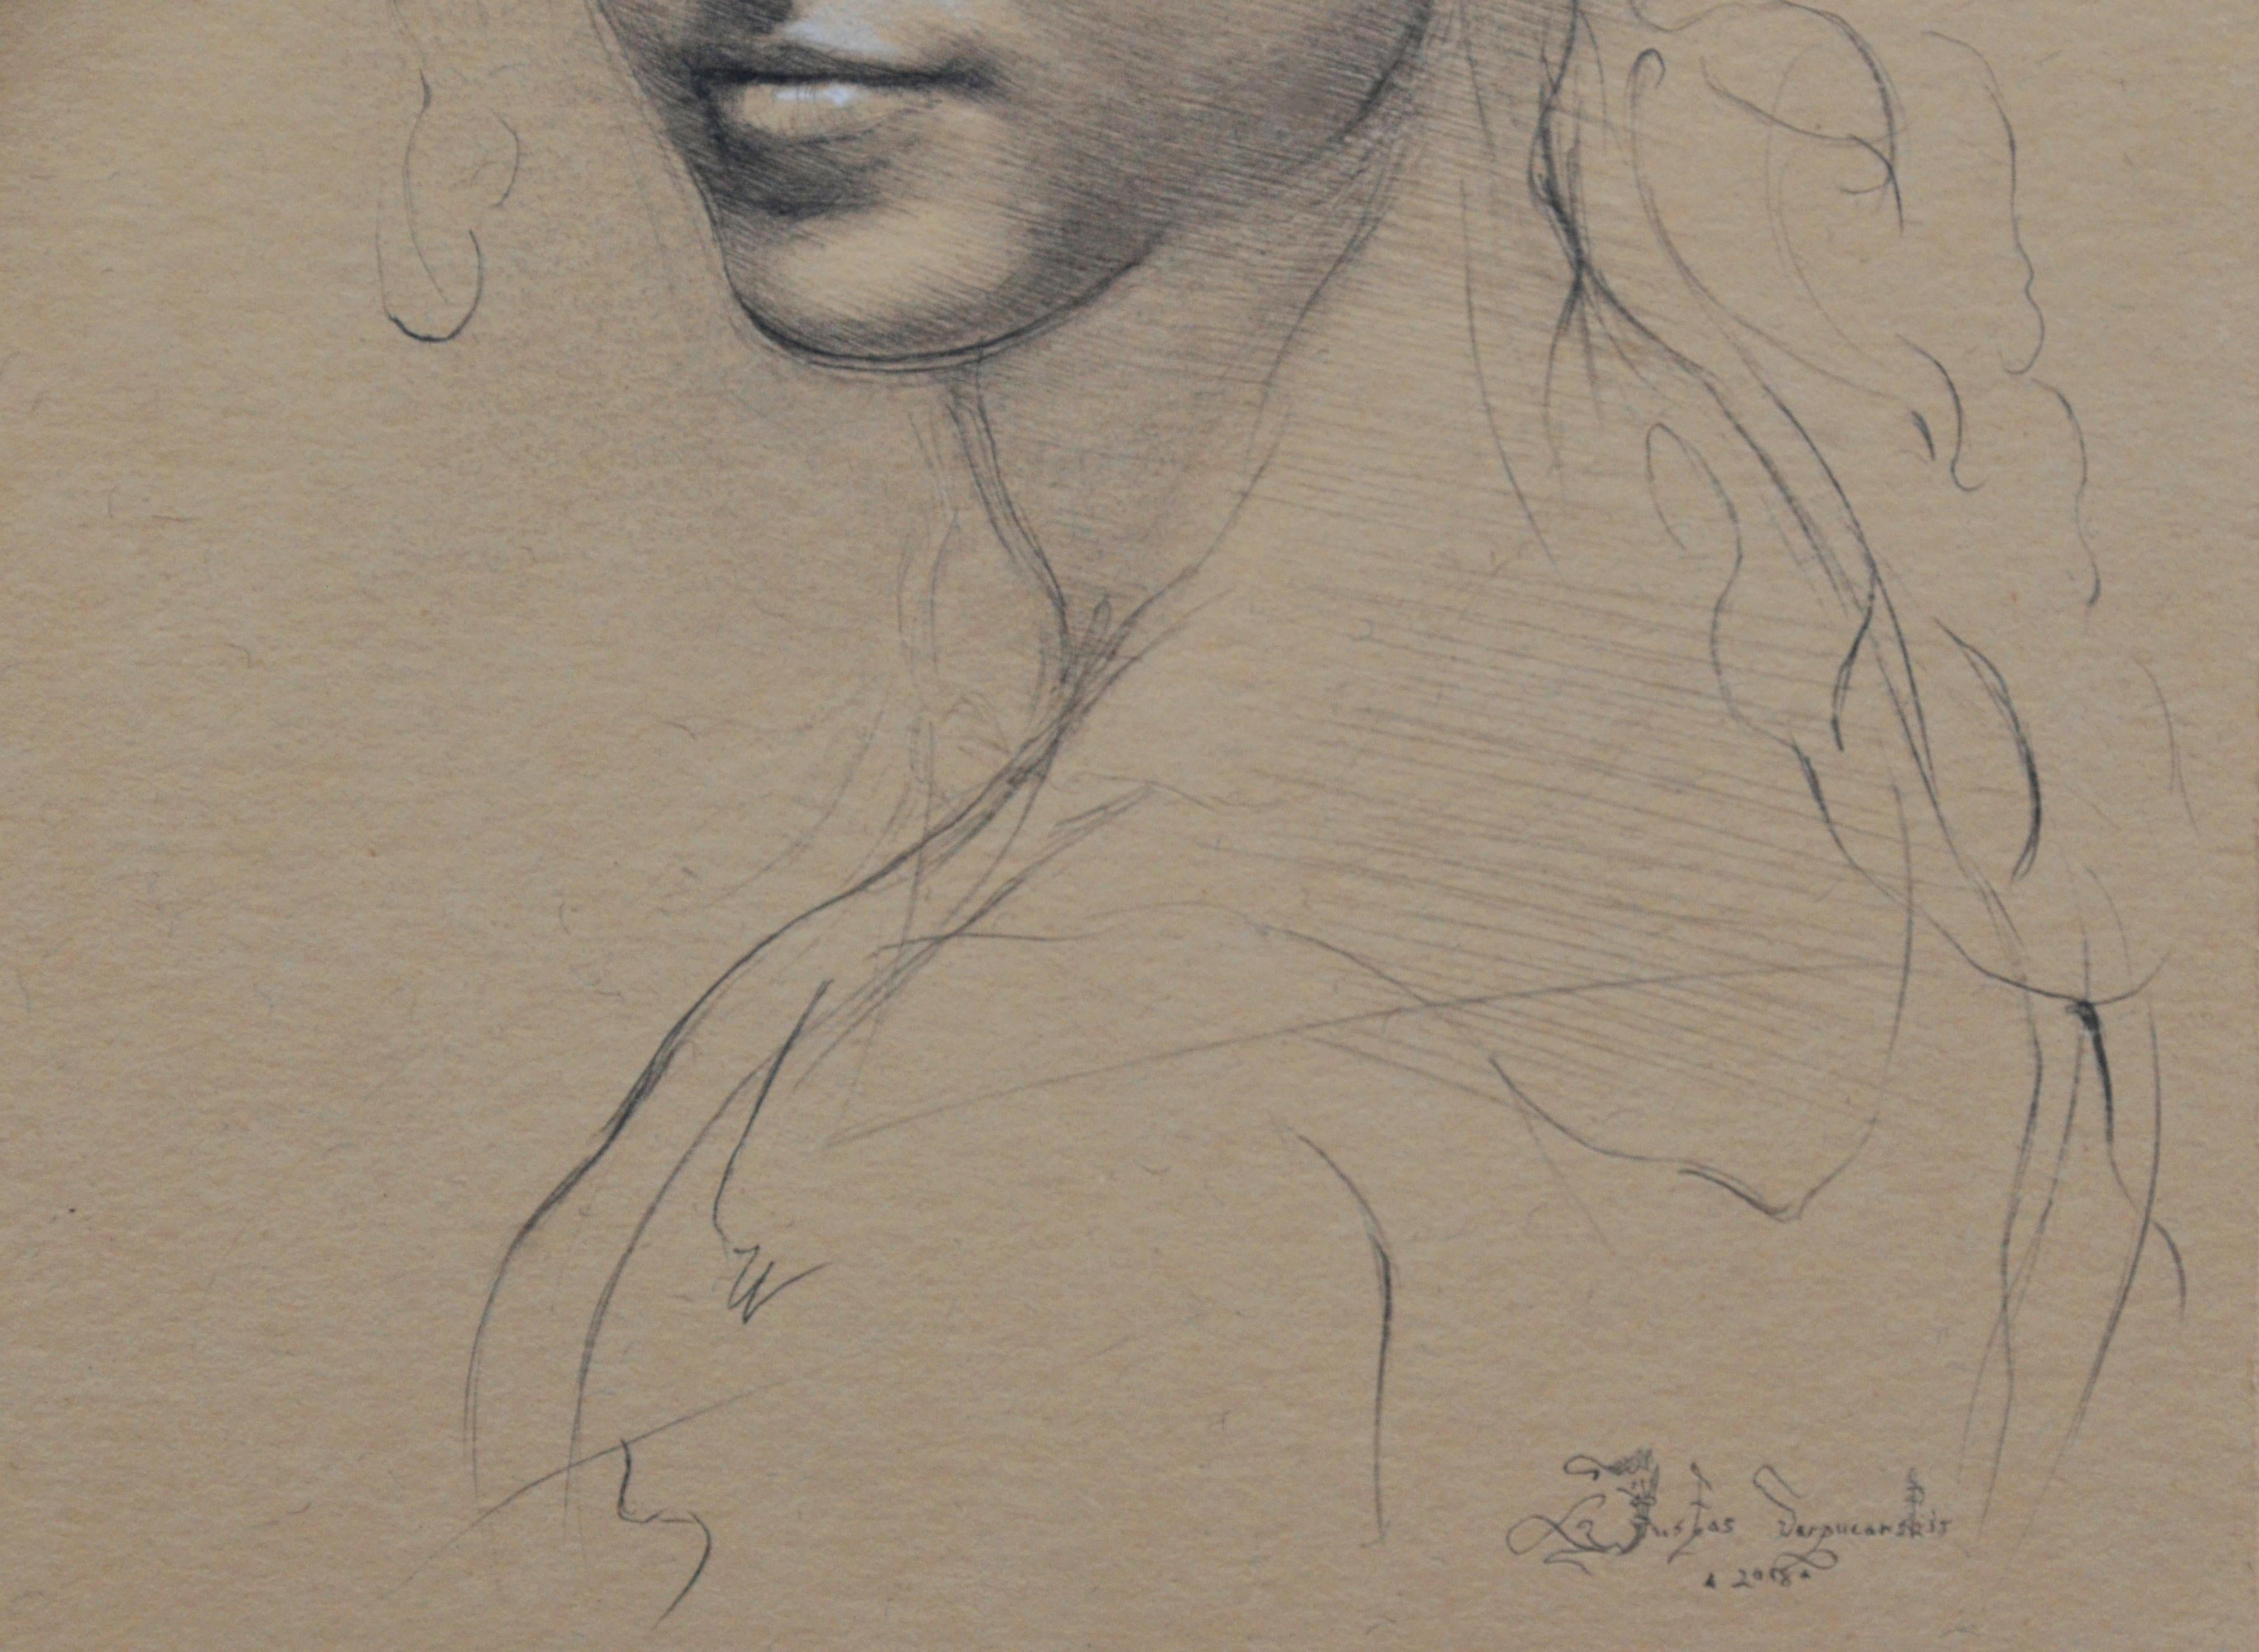 La Bella Attrice, 7.75 x 5.5 inches. Graphite and White Chalk on Toned Paper. Drawing by artist Justas Varpucanskis. This piece utilizes the 